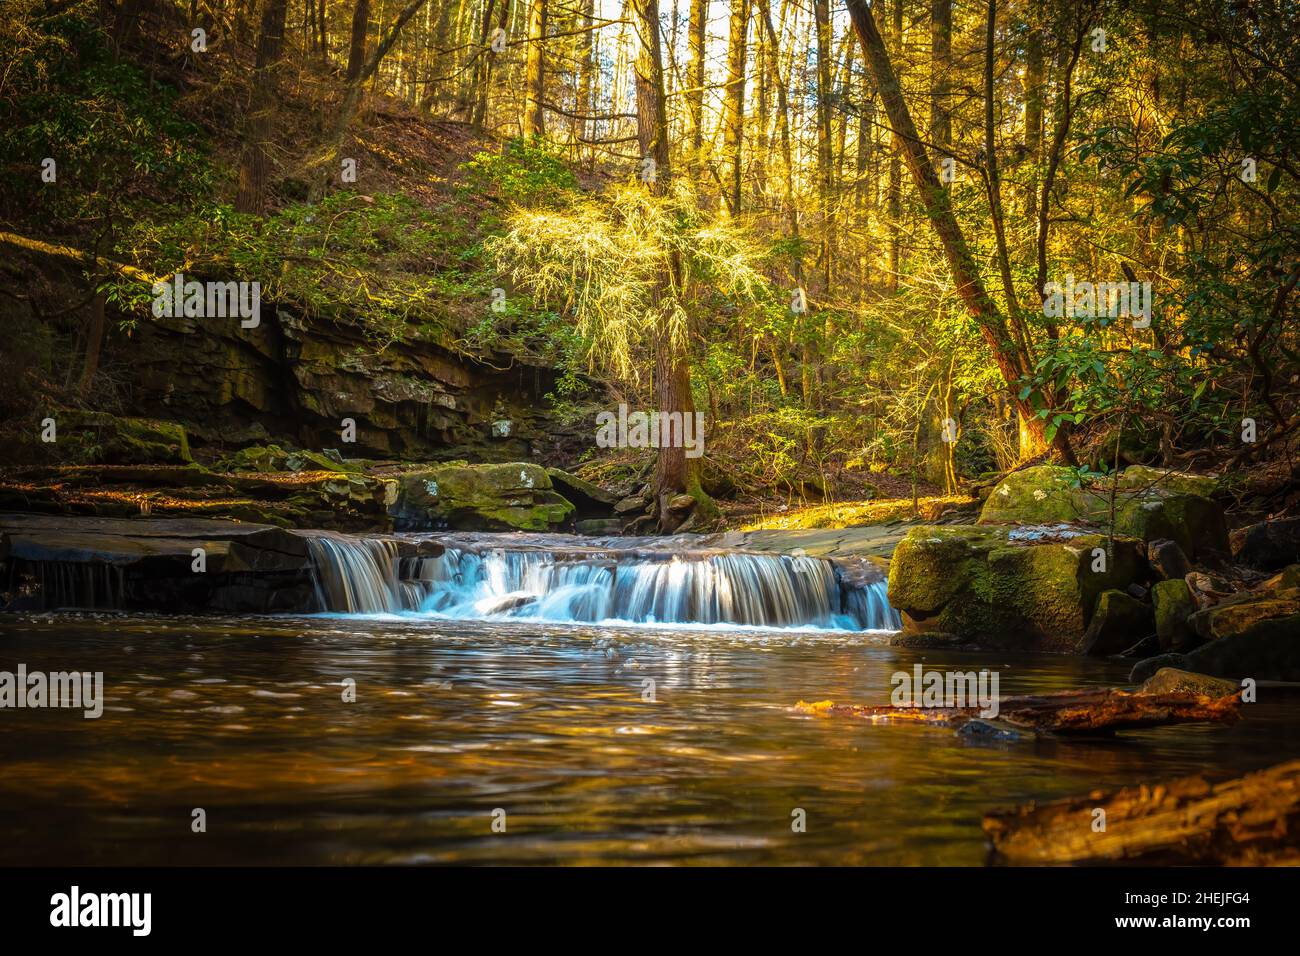 A small quaint waterall on the creek gurgles along the Fiery Gizzard Trail on the South Cumberland Plateau in Tennessee. Stock Photo